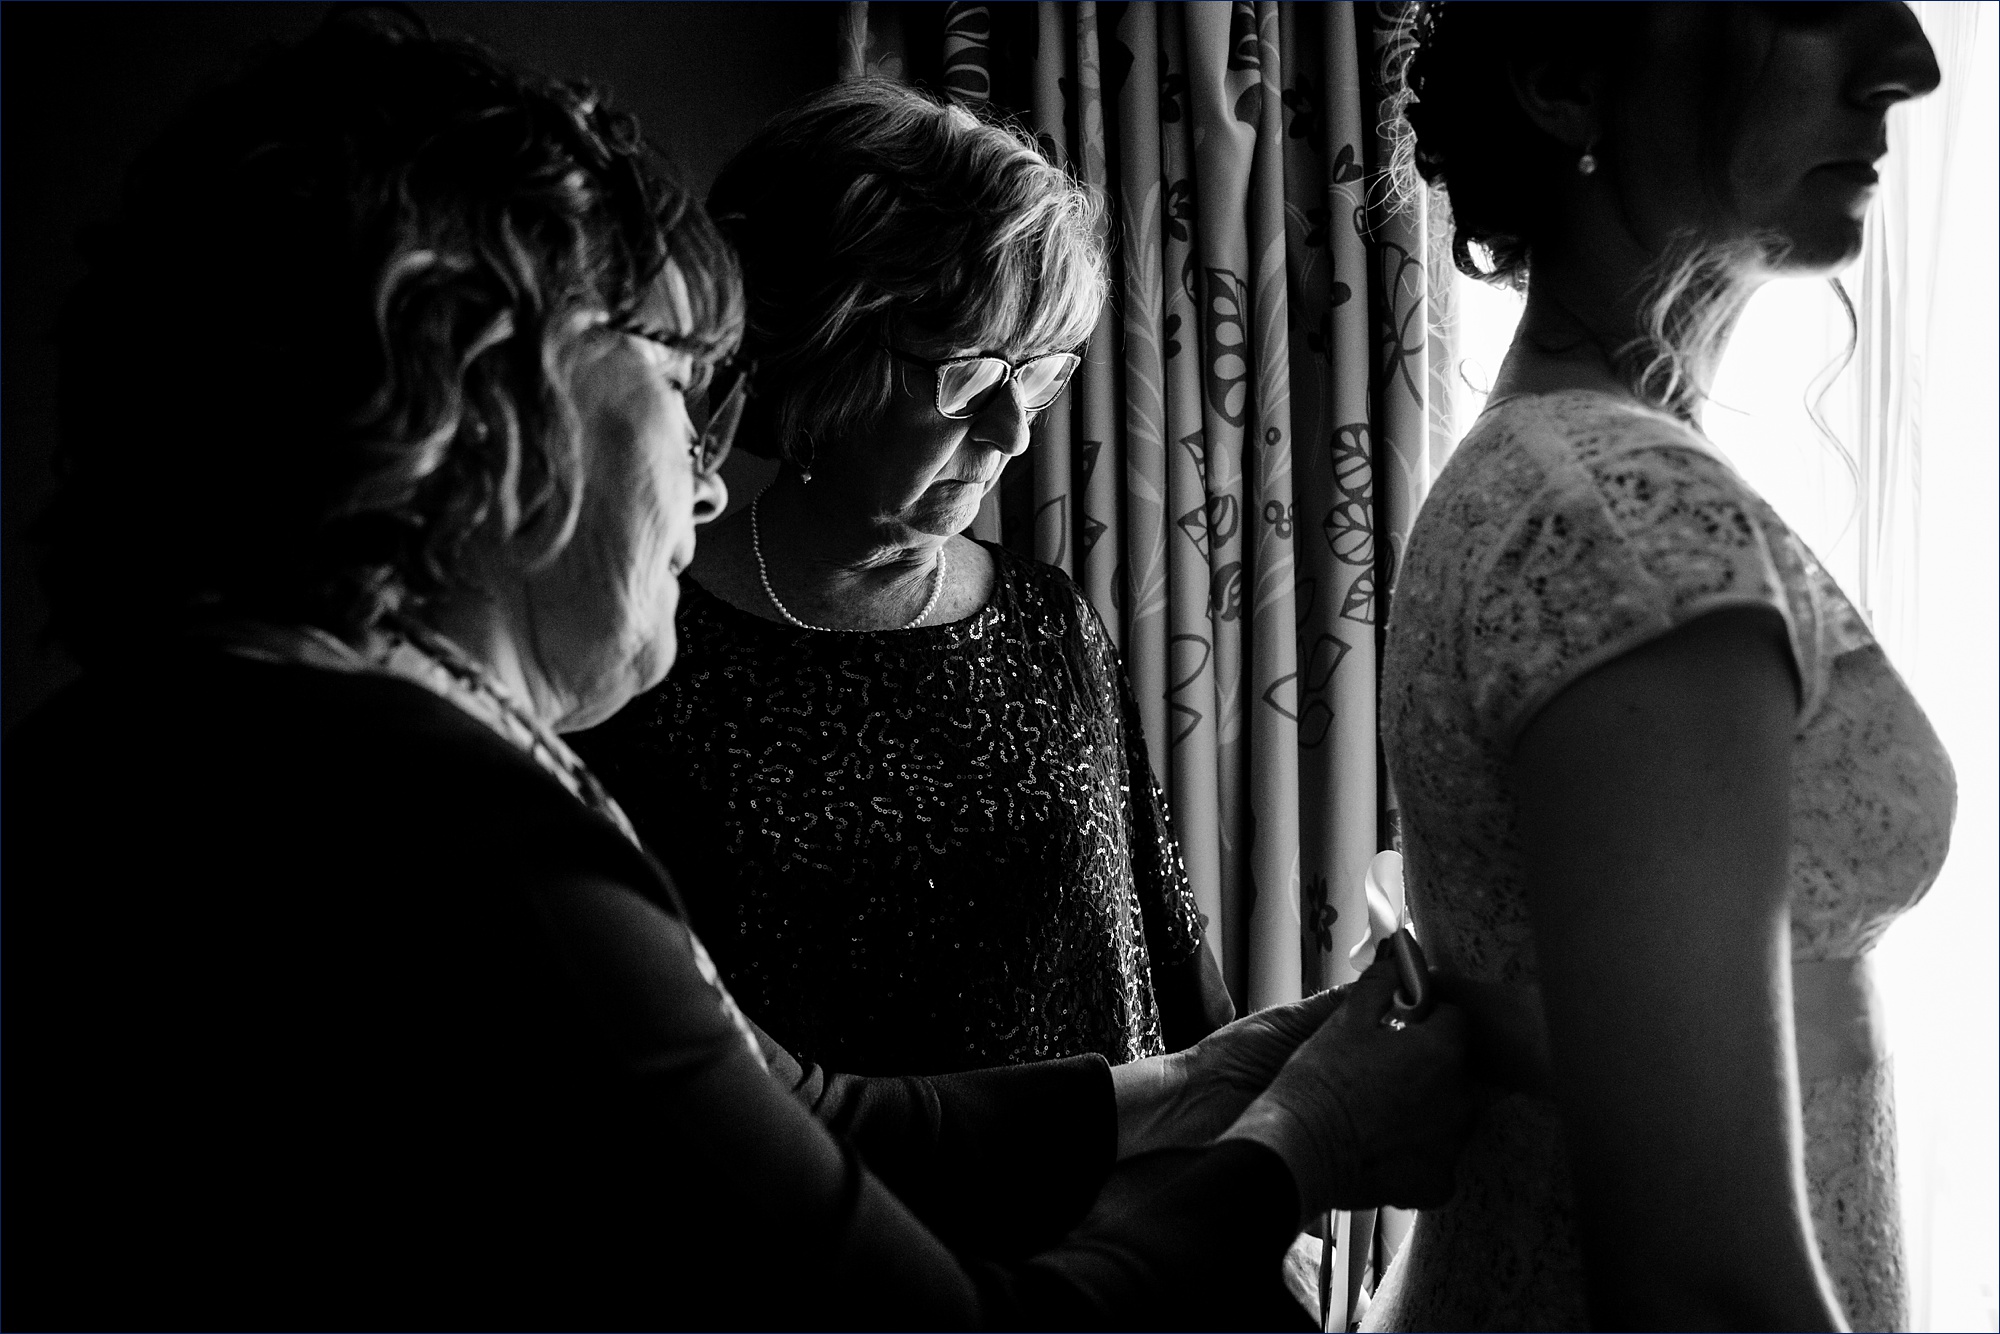 The mother of the bride ties the bow on the bride's wedding dress as they get ready for her wedding day